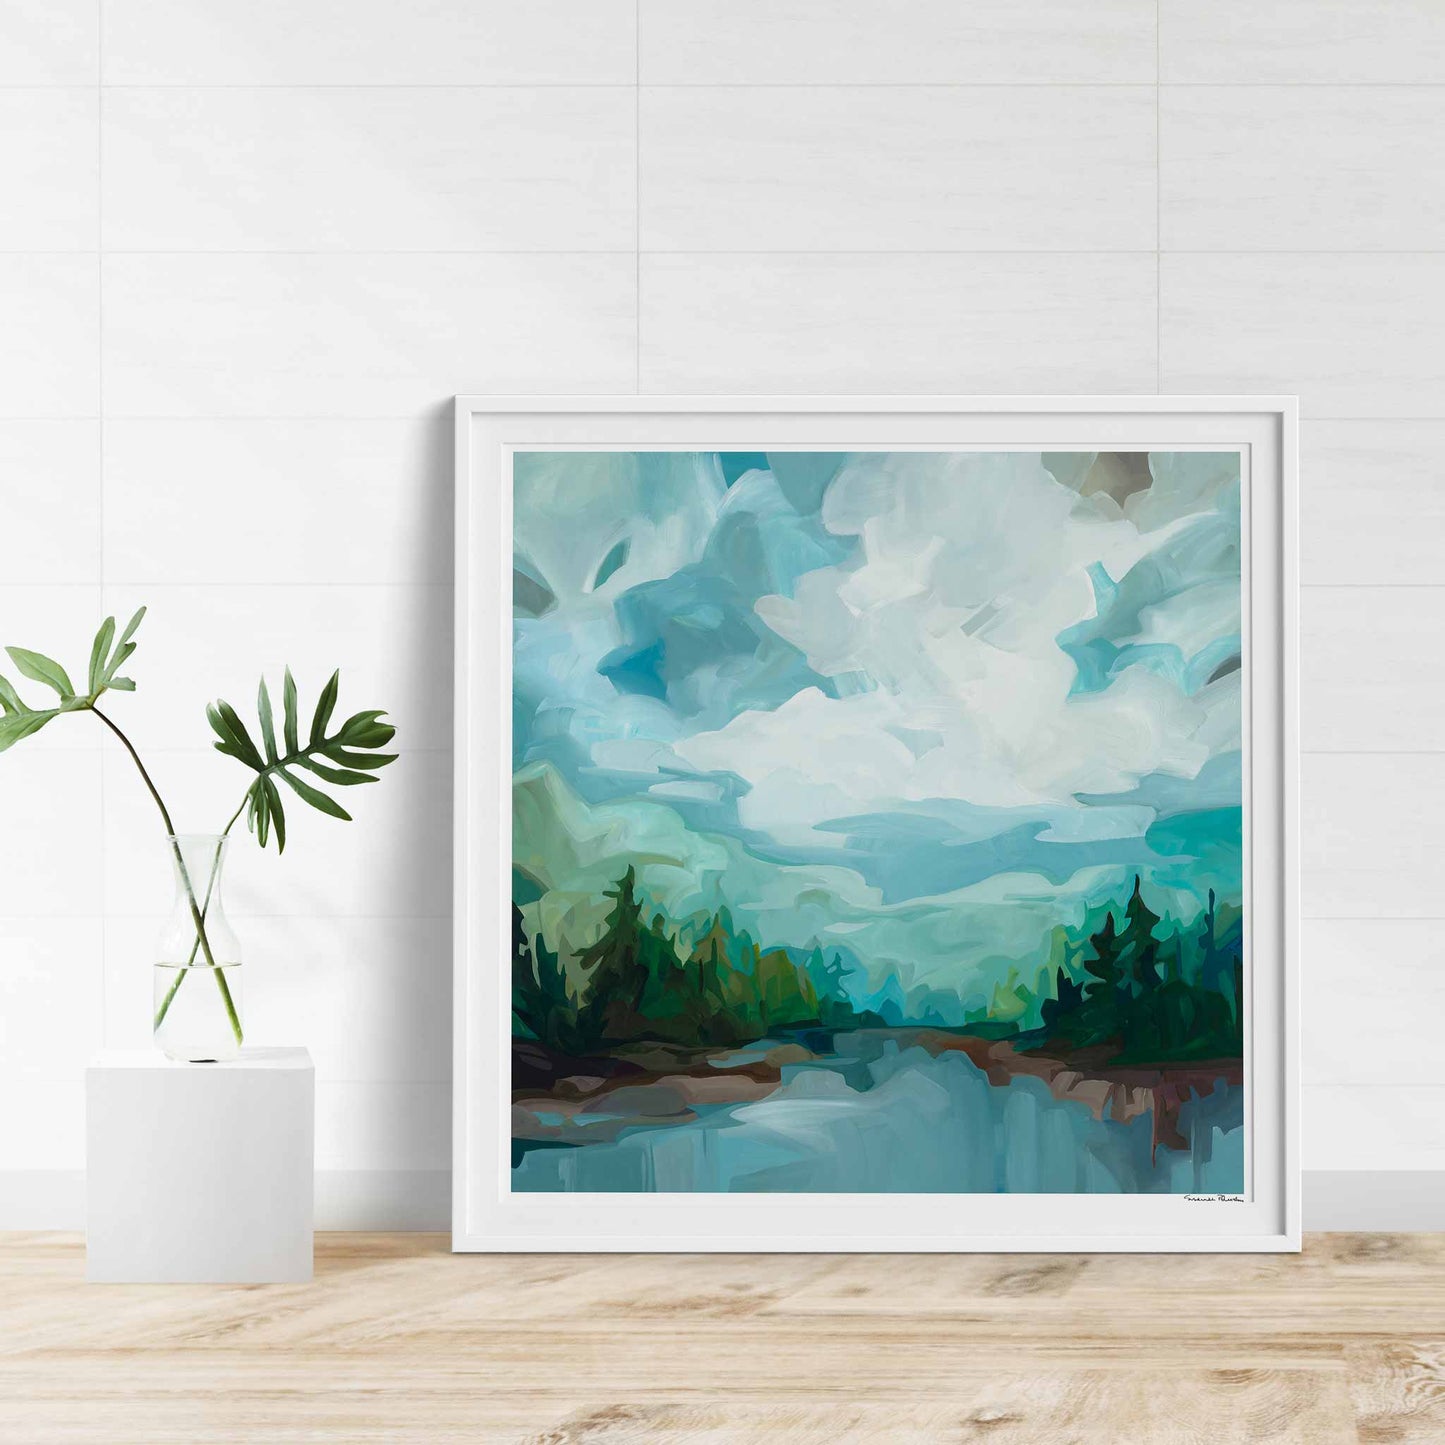 contemporary lake scene painting fine art print with an abstract sky by Canadian abstract artist Susannah Bleasby